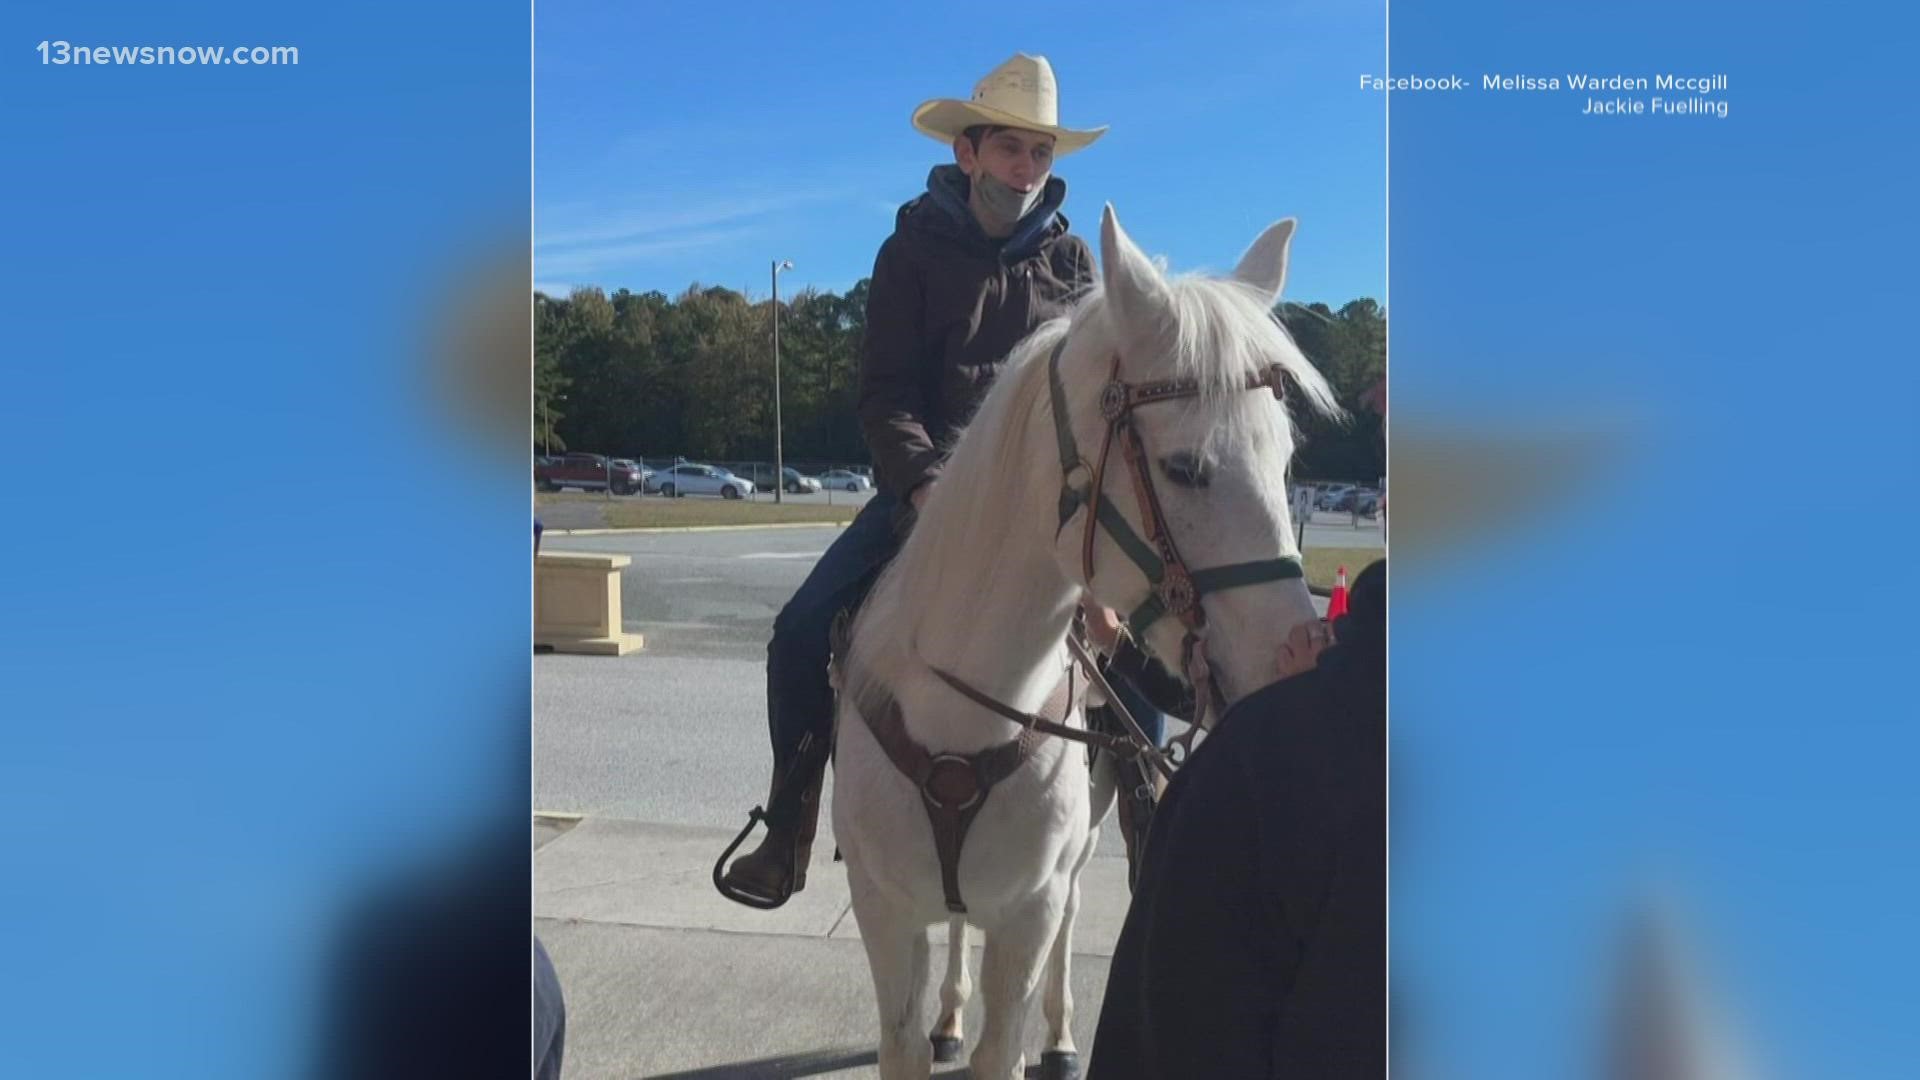 Austin McGill thought it would be a memorable senior prank, and it was. He rode a horse into his high school and ended up getting a 10-day suspension.